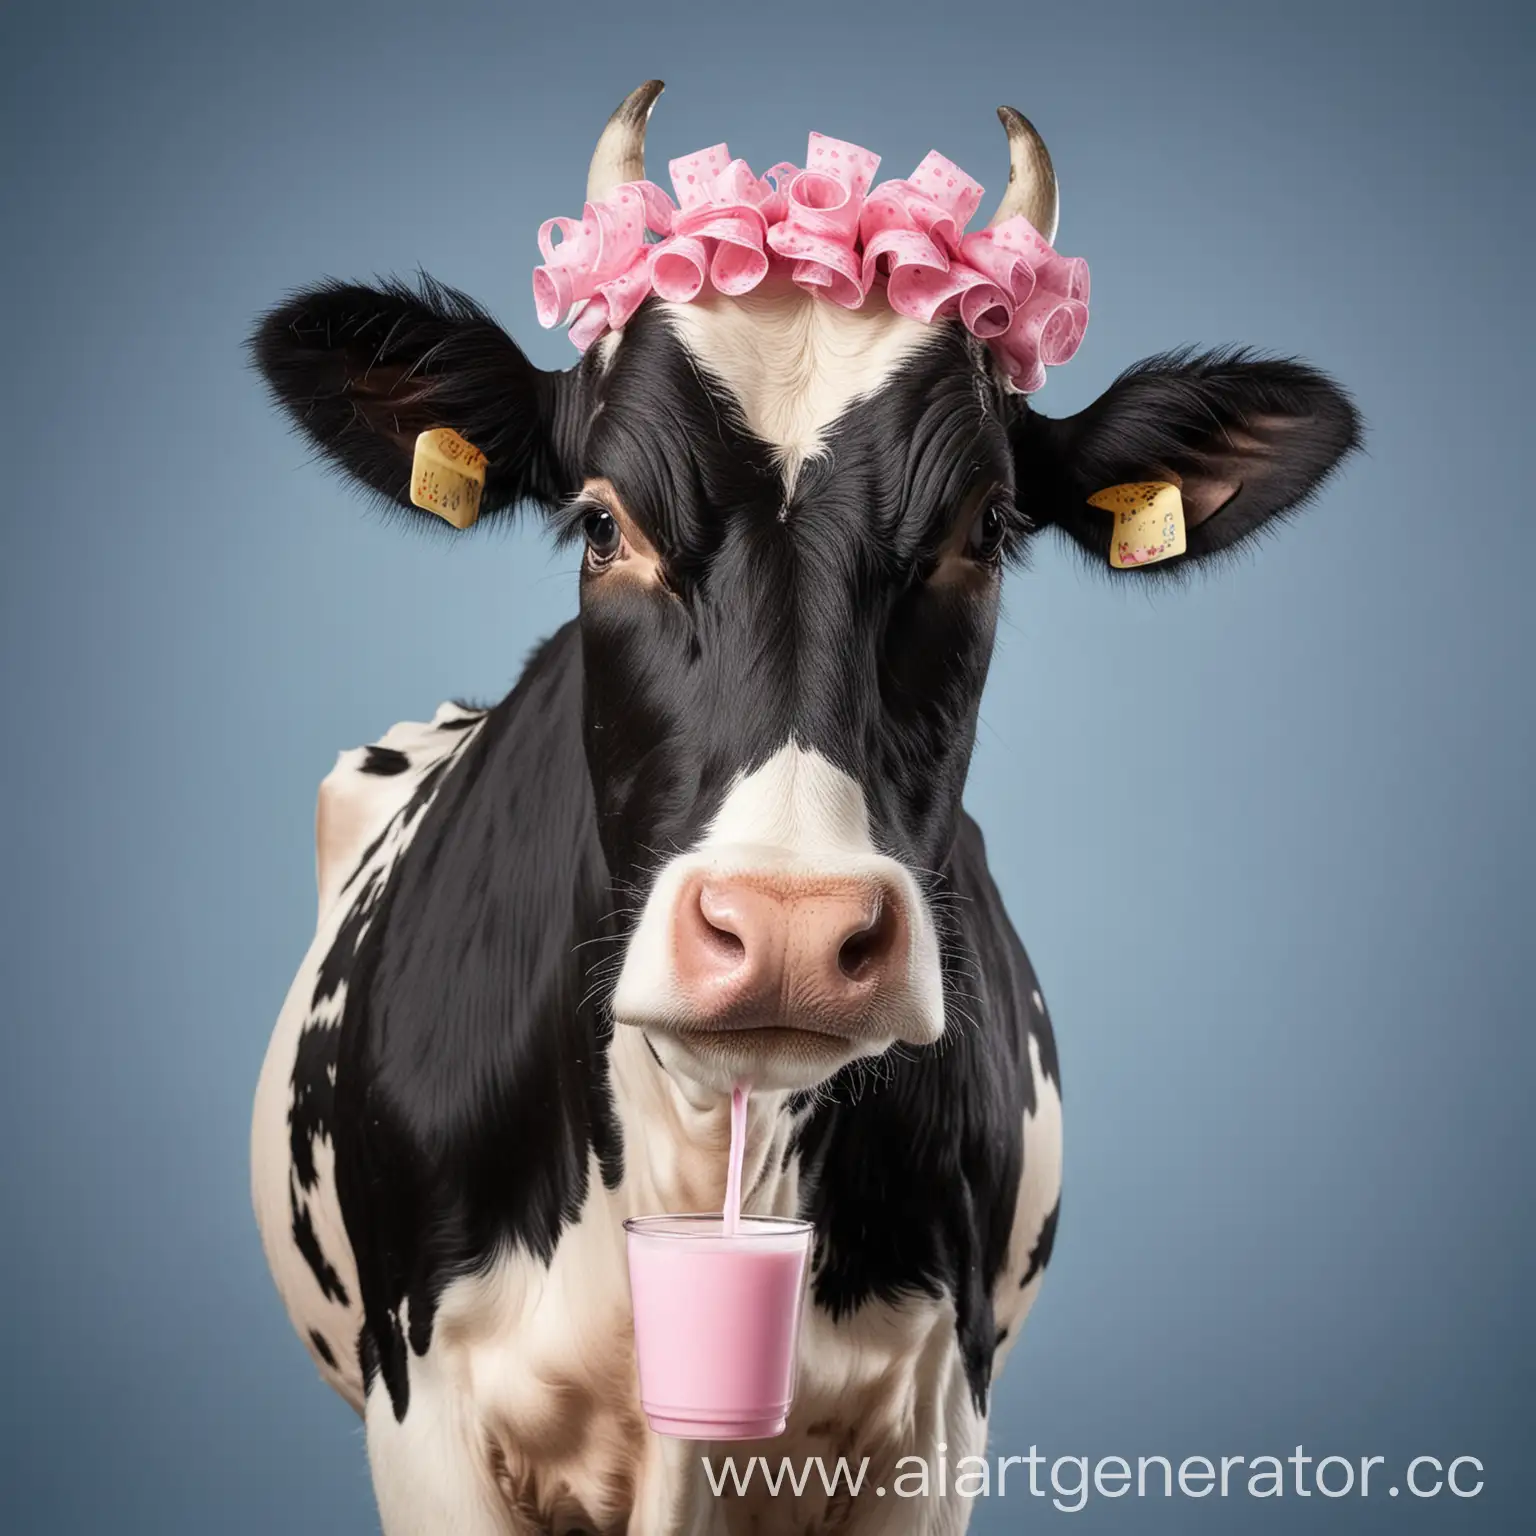 Whimsical-Cow-Portrait-Quirky-BlackandWhite-Bovine-Enjoying-a-Cup-of-Milk-on-Blue-Background